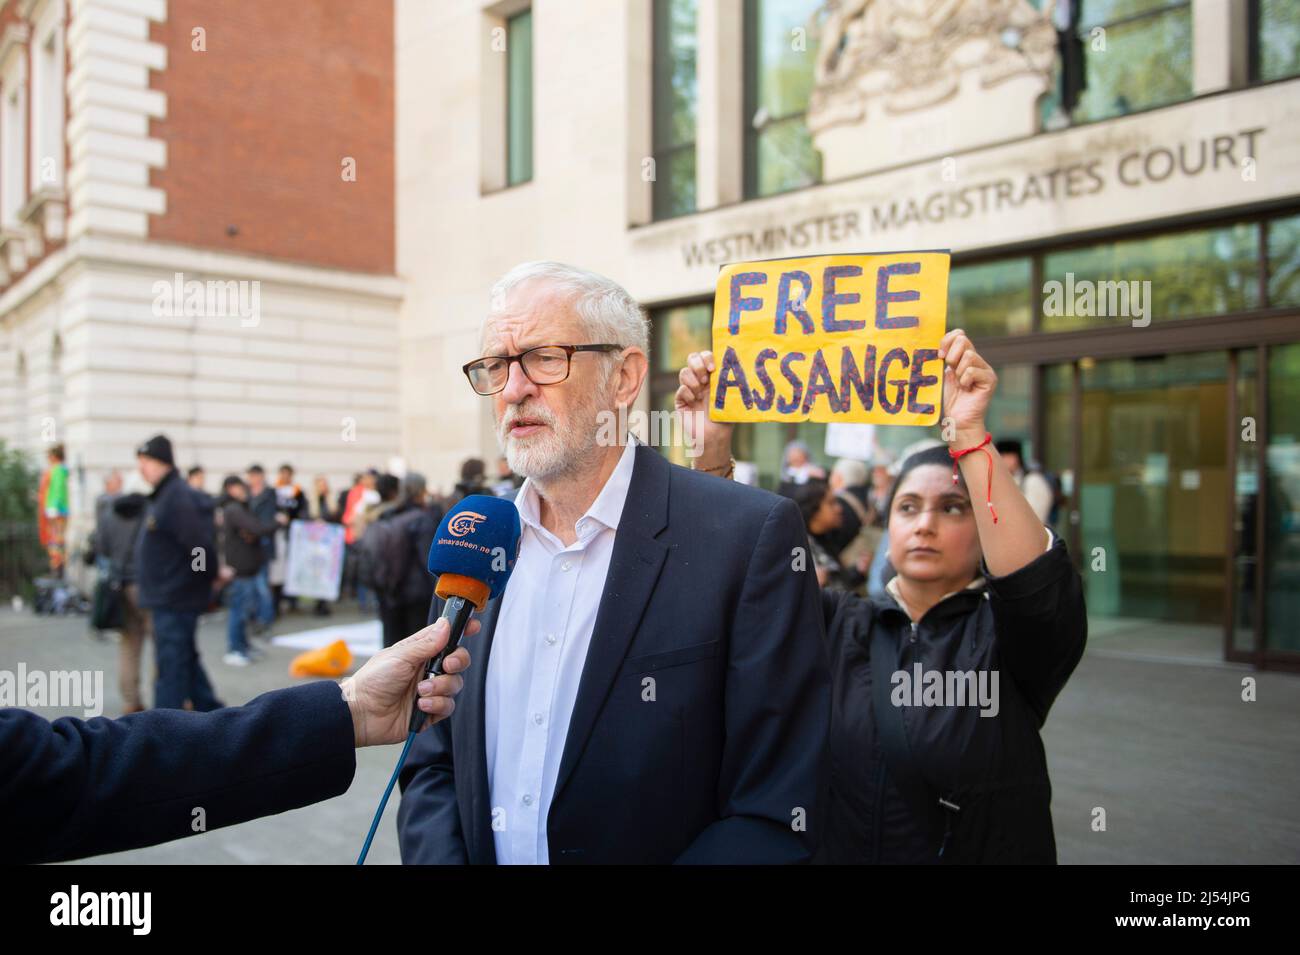 London, UK, London, UK. 20th Apr, 2022. Jeremy Corbyn speaks outside Westminister Magistrates Court following formal approval for the extradition of Julian Assange to the US on espionage charges, a decision to be made by the UK home secretary, Priti Patel. Credit: claire doherty/Alamy Live News Stock Photo